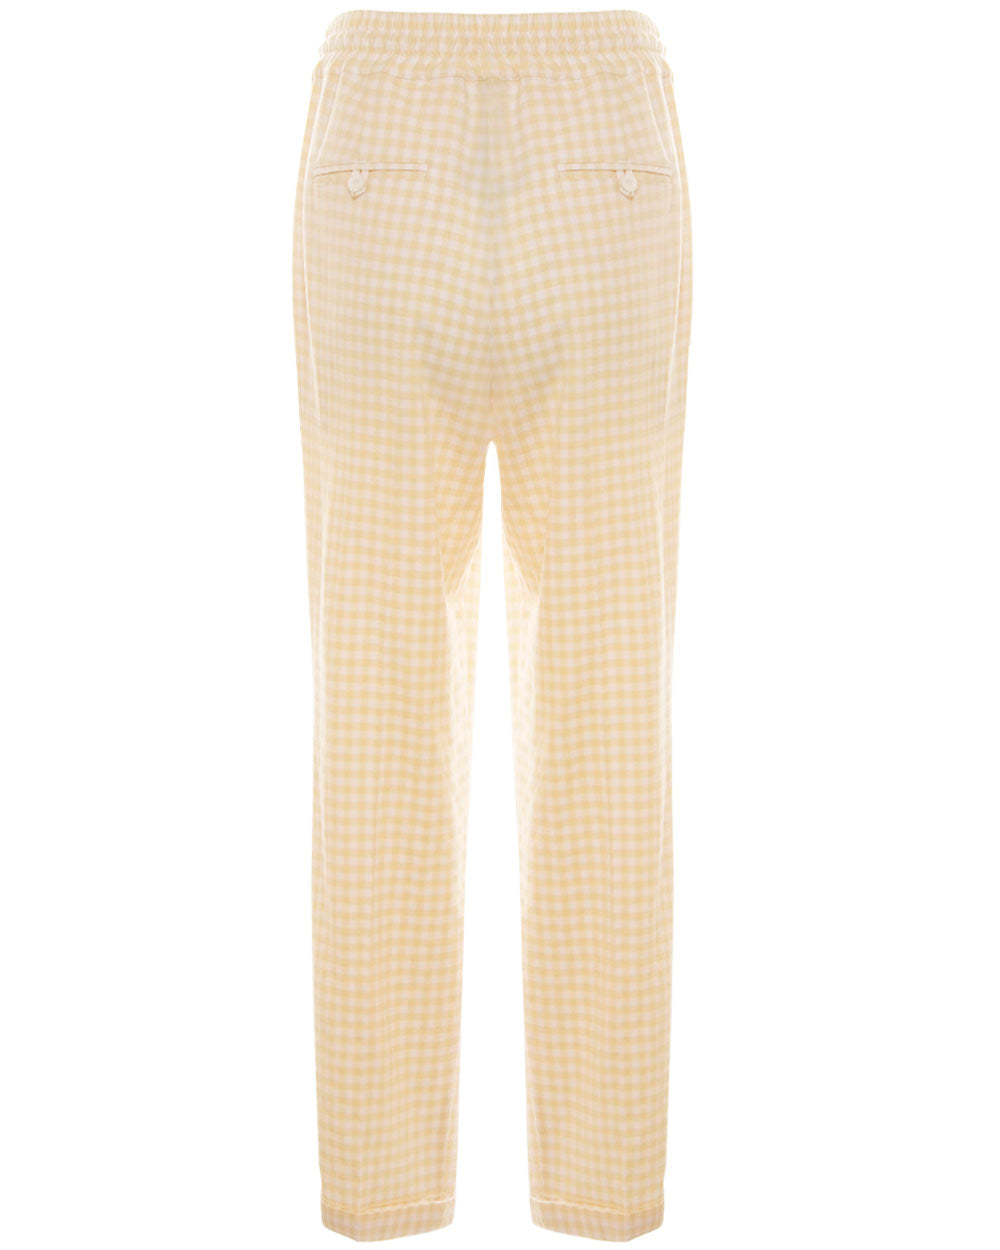 Pale Yellow Gingham Cuffed Trouser